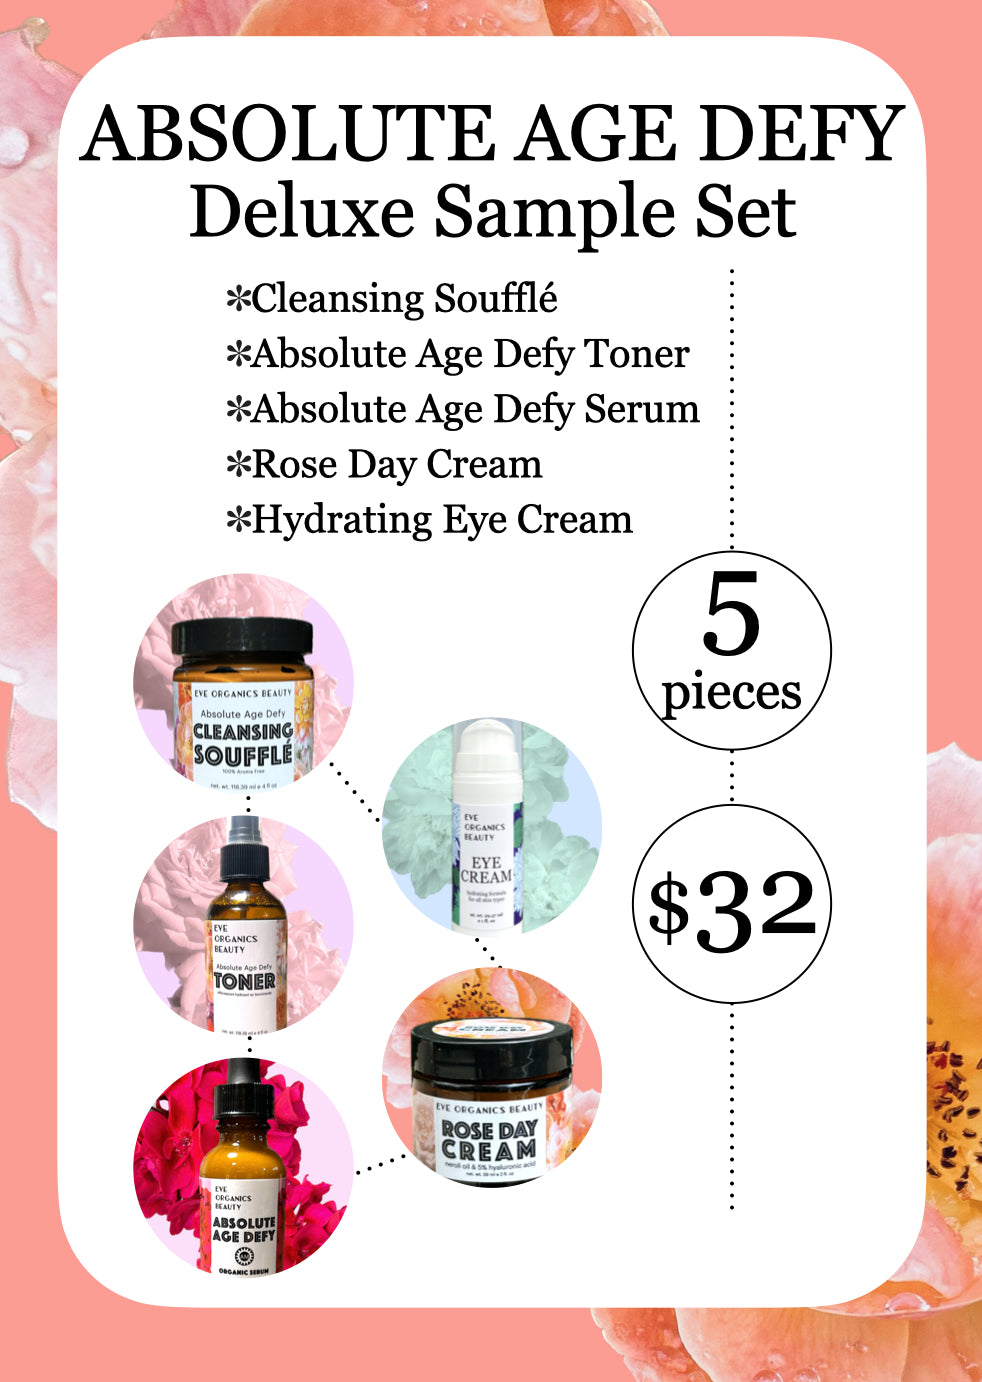 ABSOLUTE AGE DEFY Deluxe Sample Kit